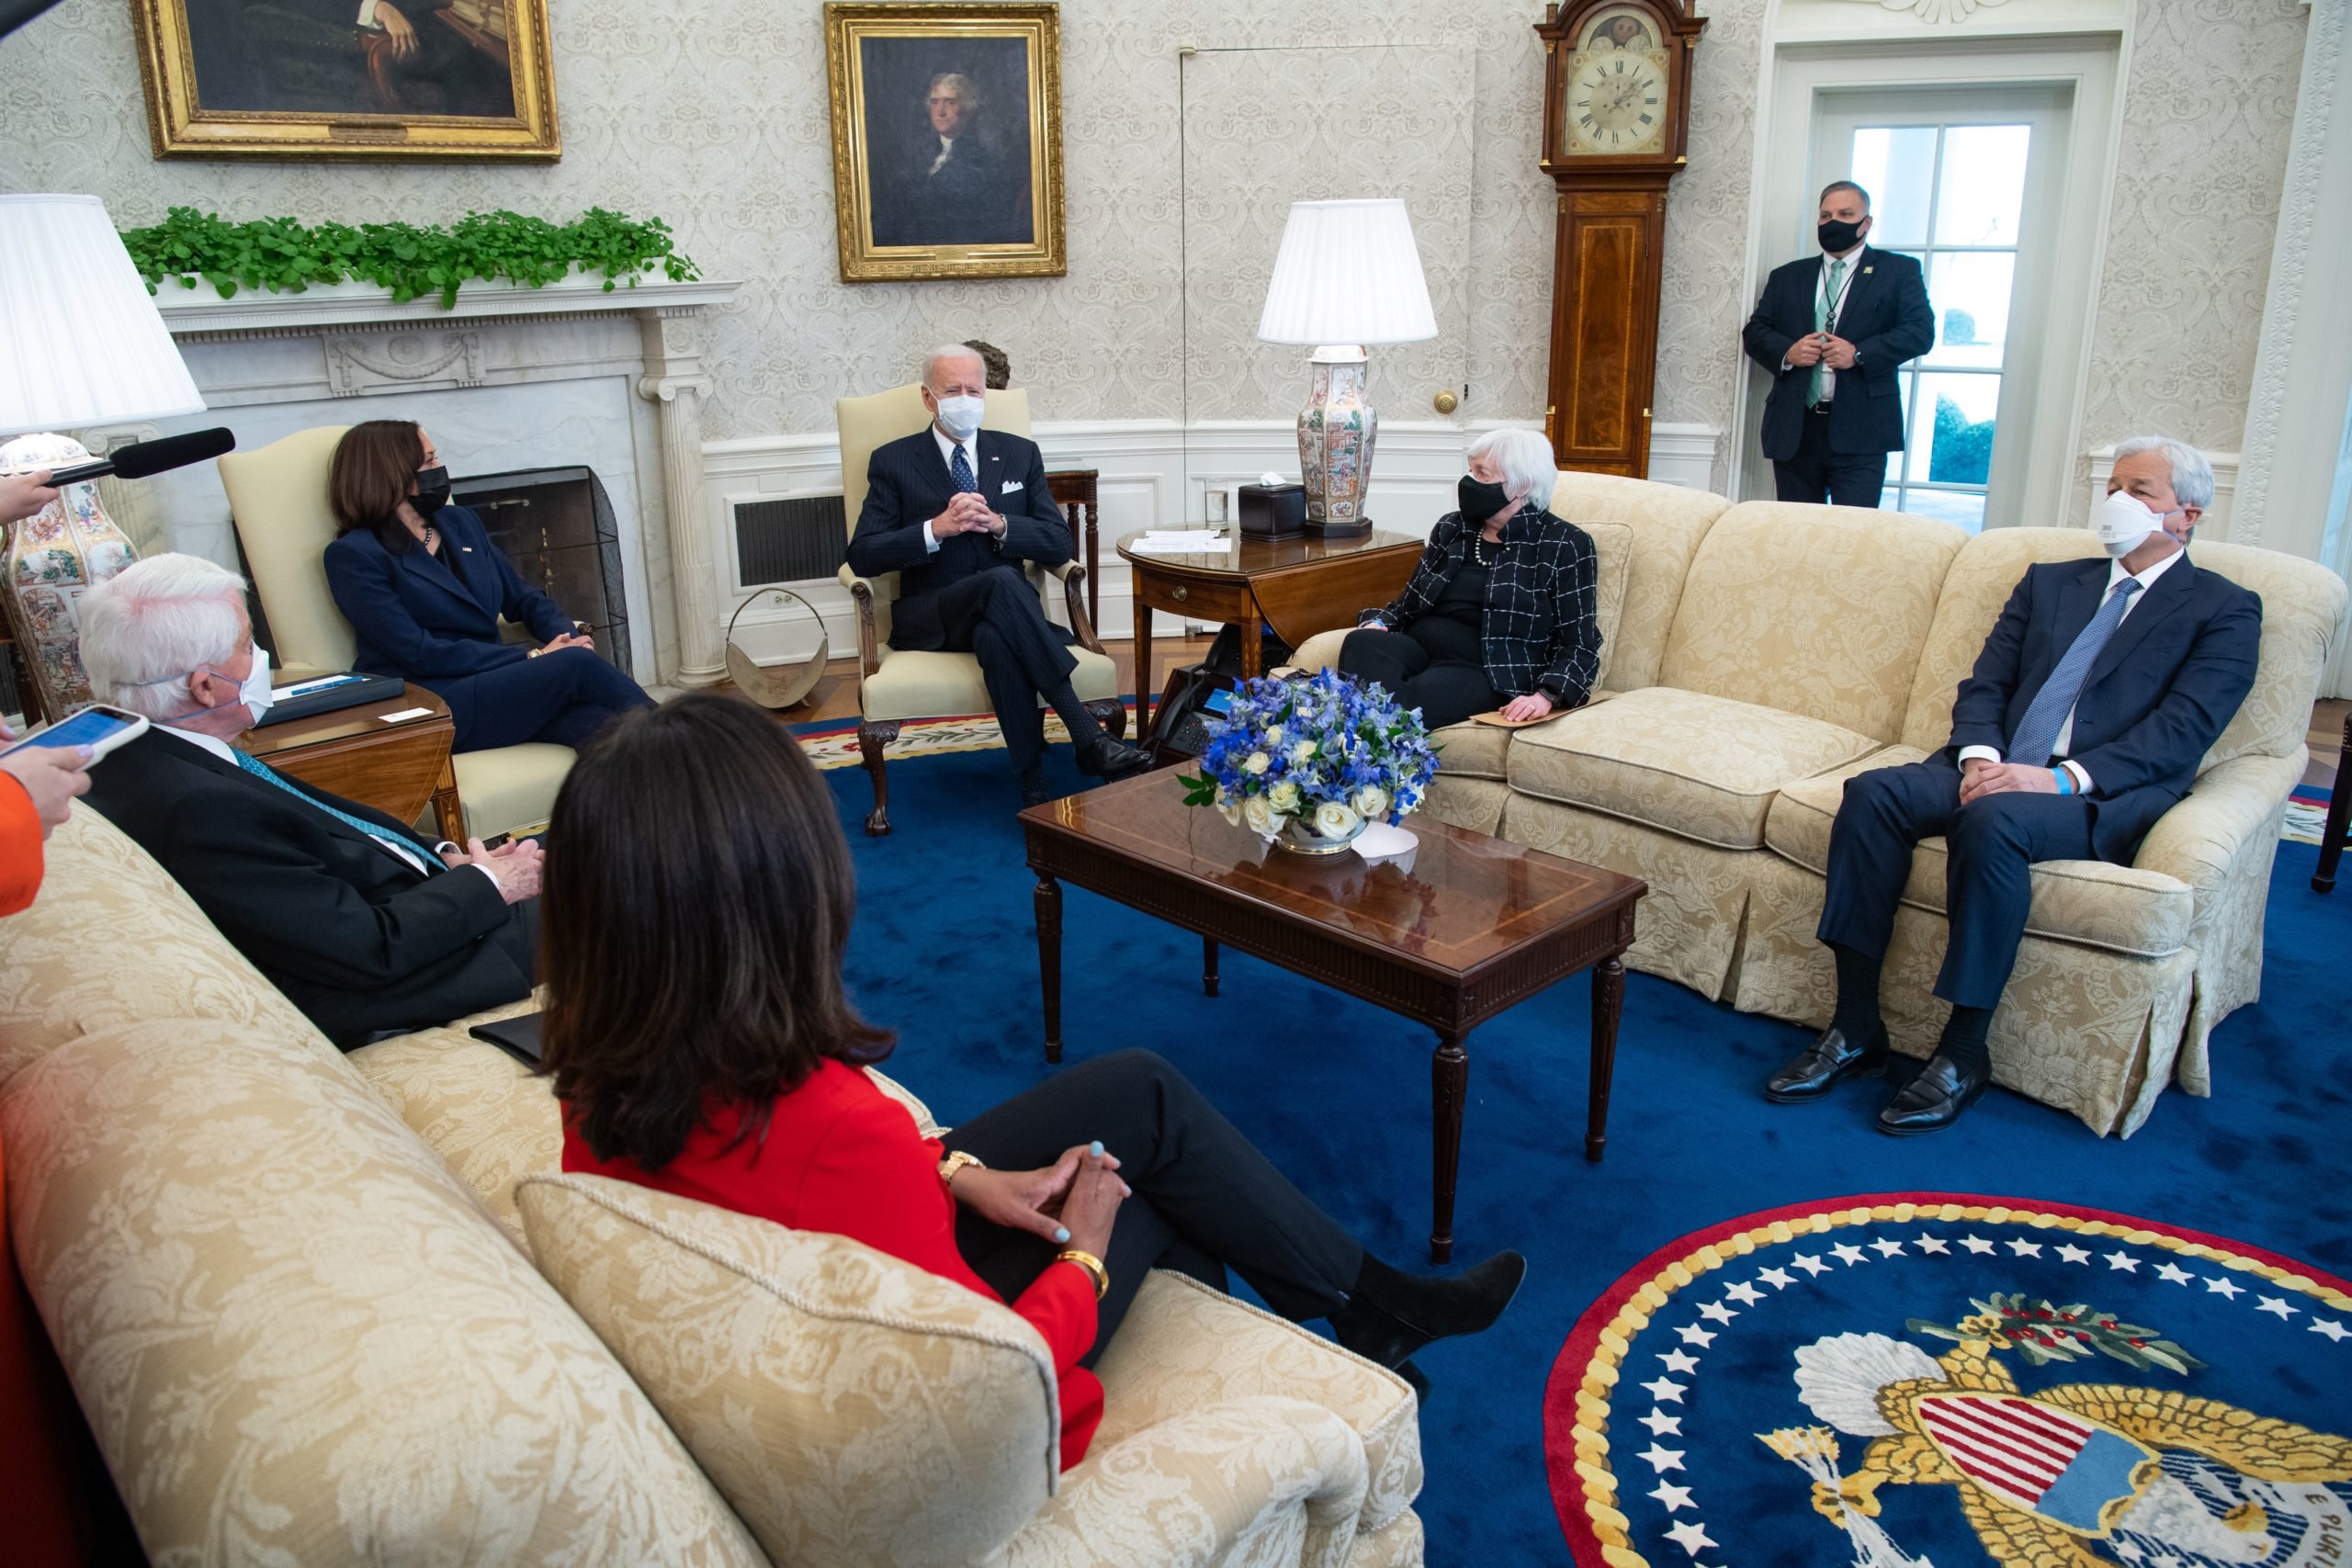 President Joe Biden meets with business leaders including JP Morgan Chase CEO Jamie Dimon, about the coronavirus relief bill on Feb. 9. (Saul Loeb/AFP via Getty Images)